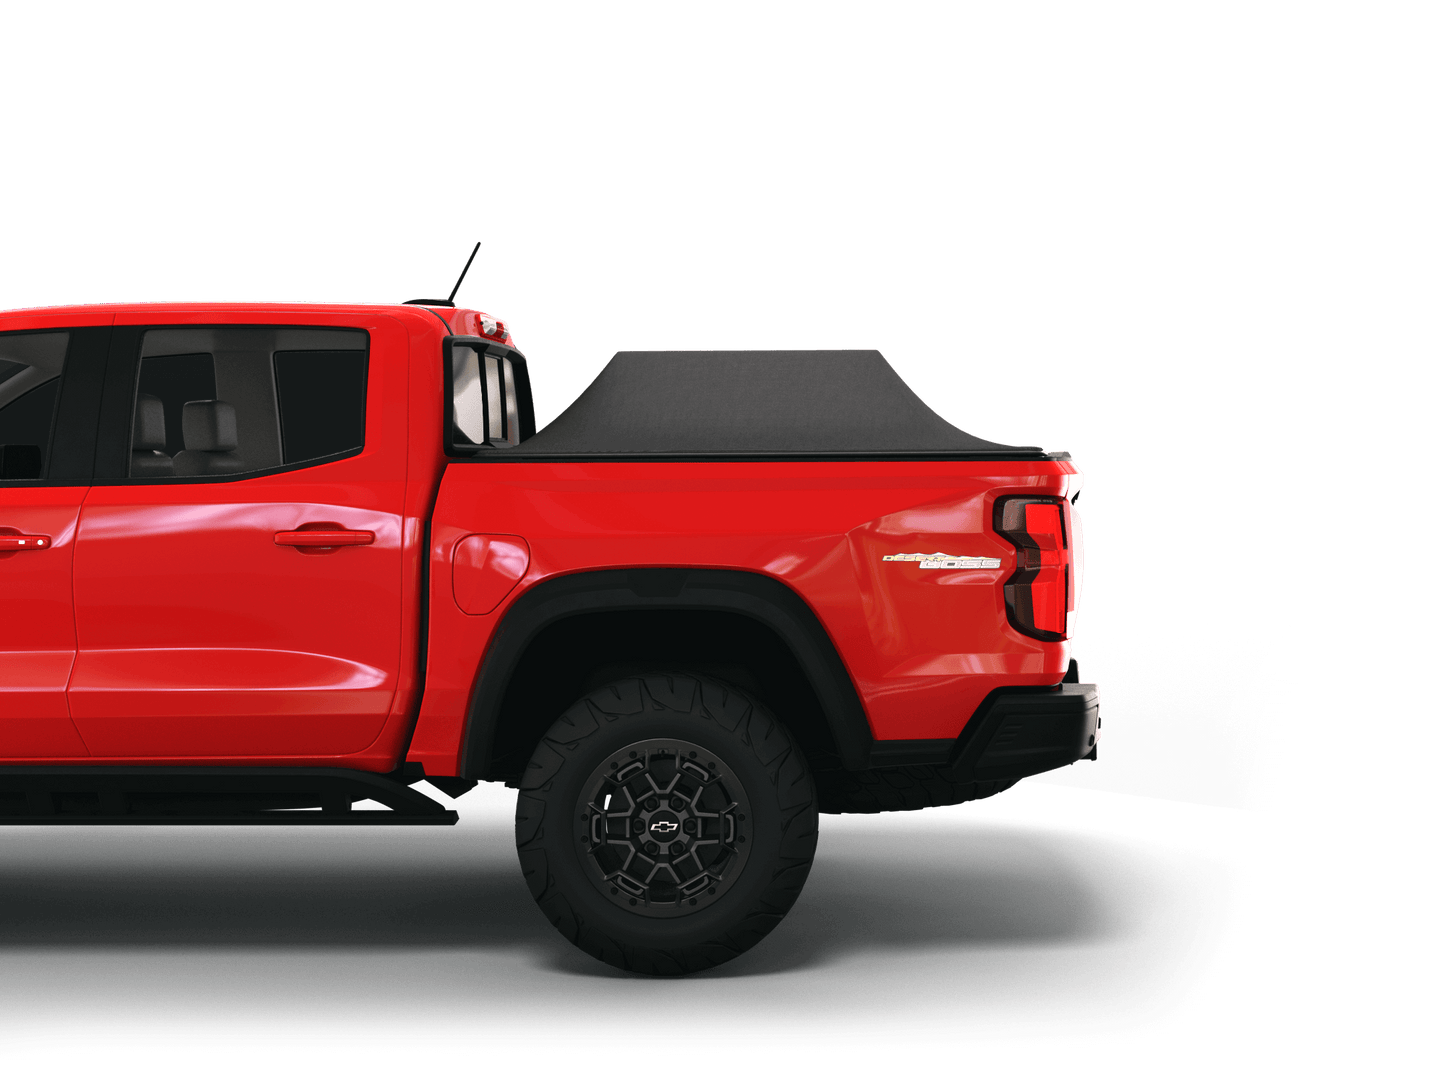 Red Chevrolet Colorado / GMC Canyon with Sawtooth Stretch tonneau cover expanded over cargo load